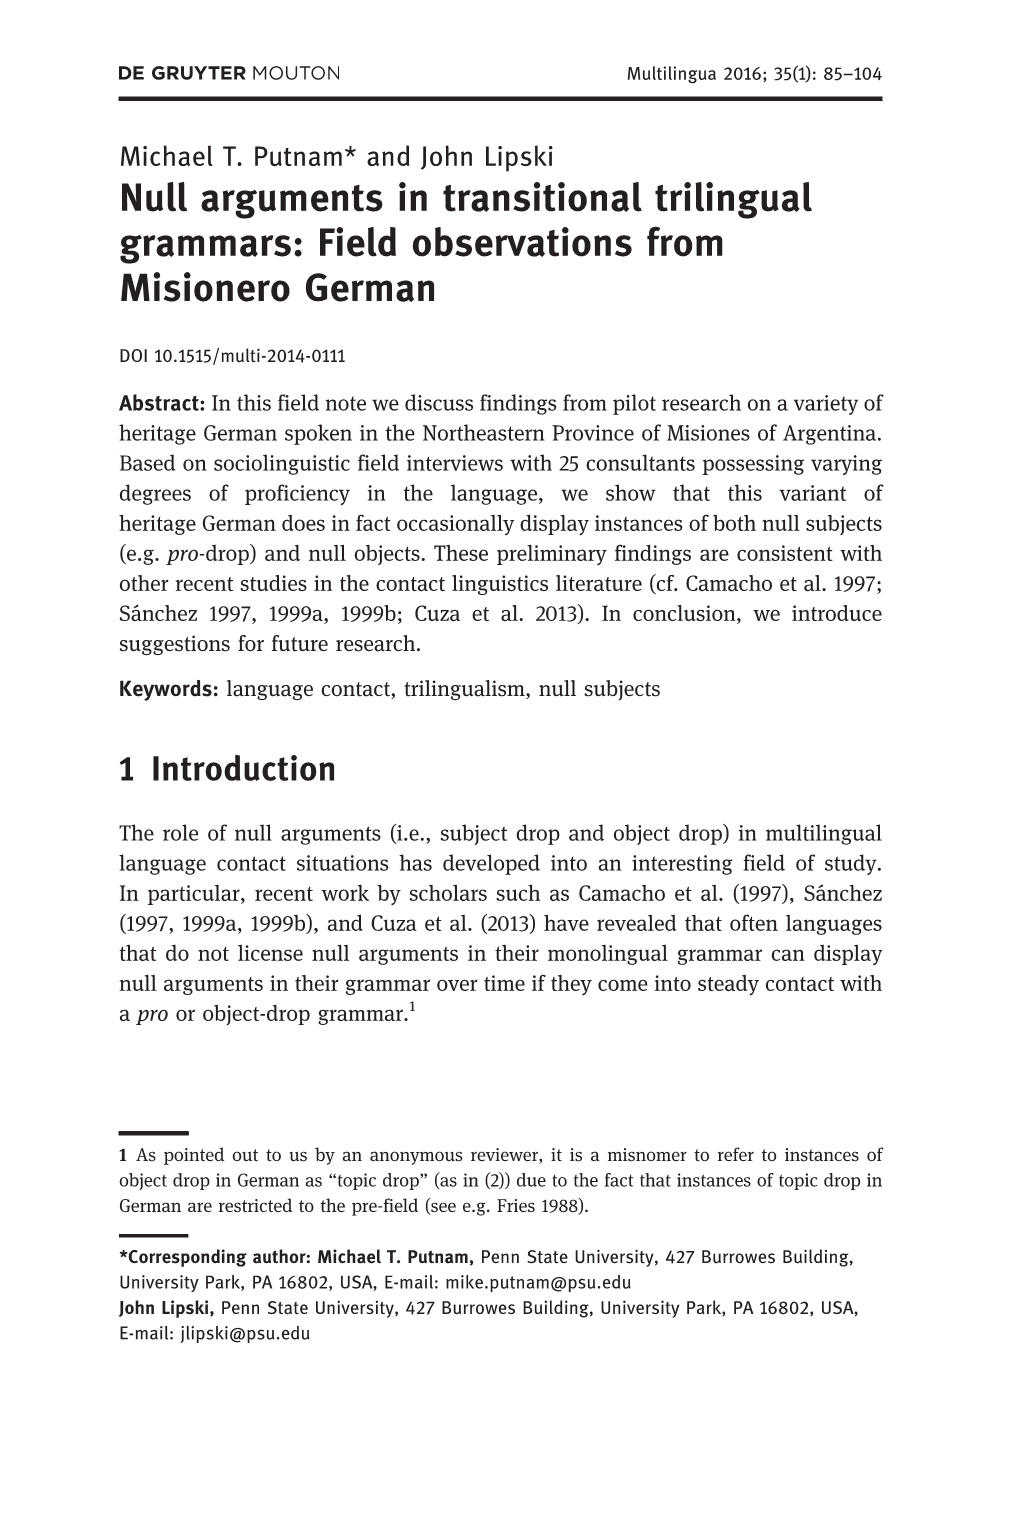 Null Arguments in Transitional Trilingual Grammars: Field Observations from Misionero German